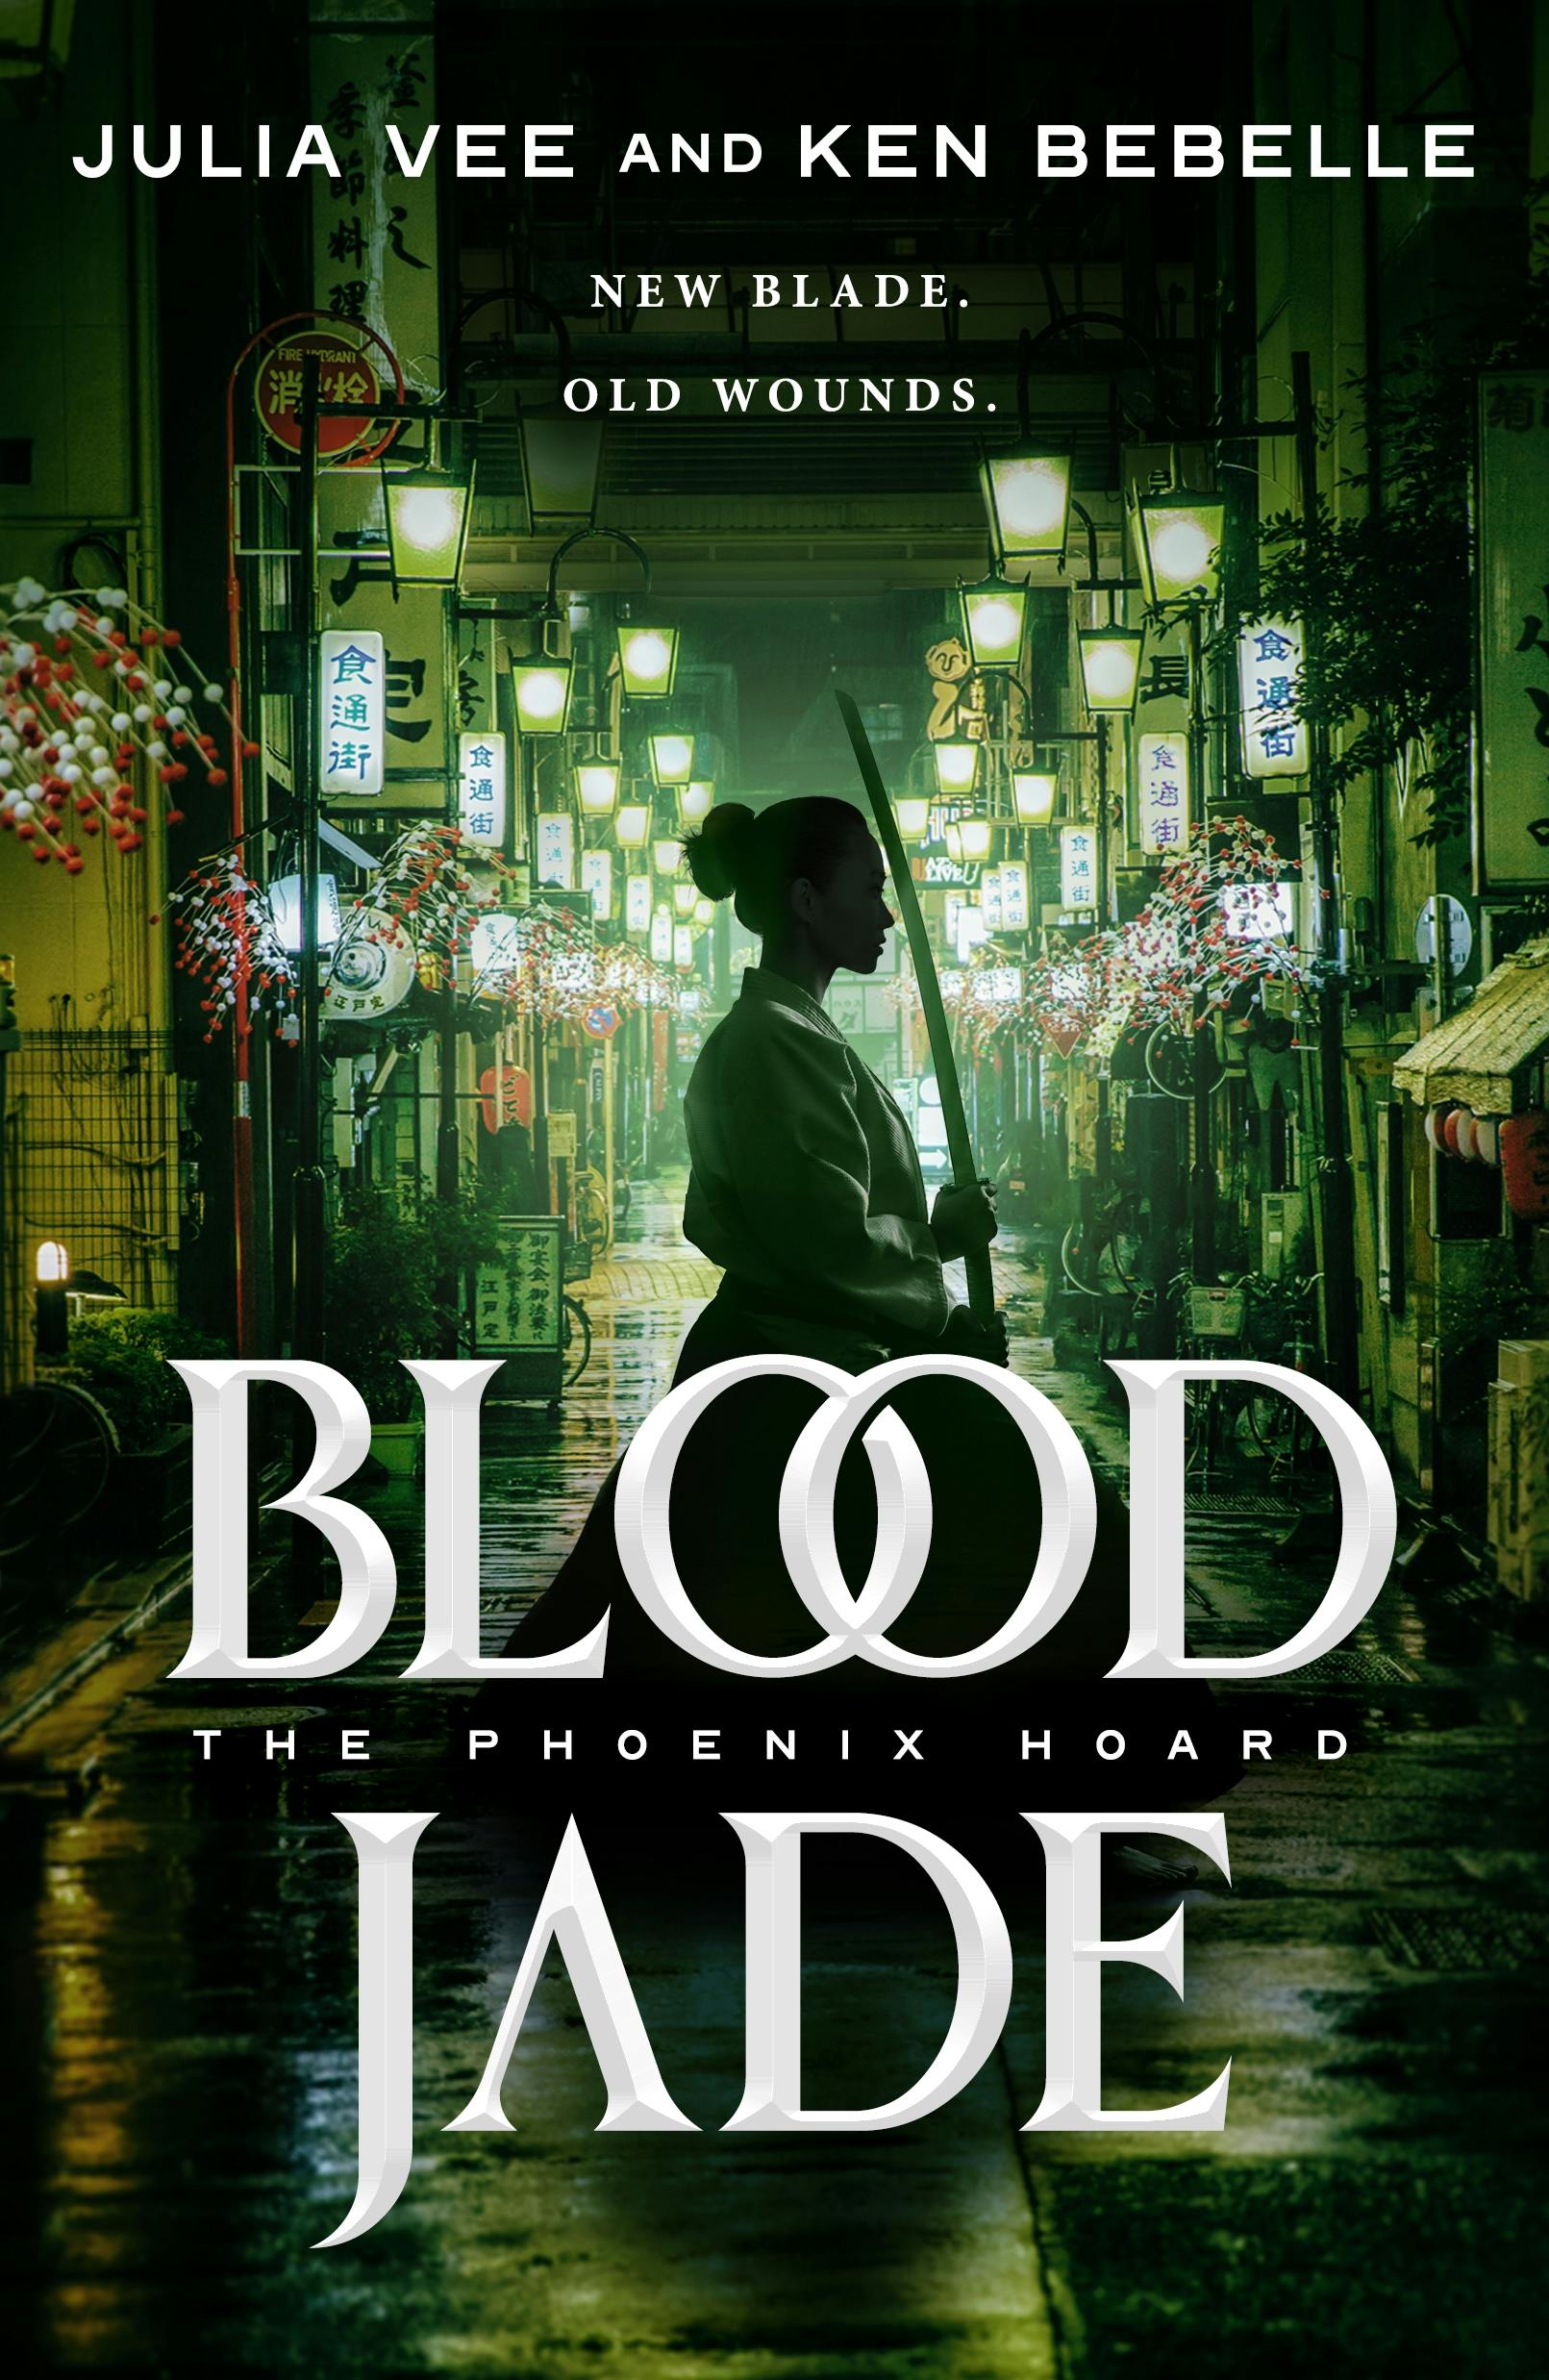 Cover for the book titled as: Blood Jade